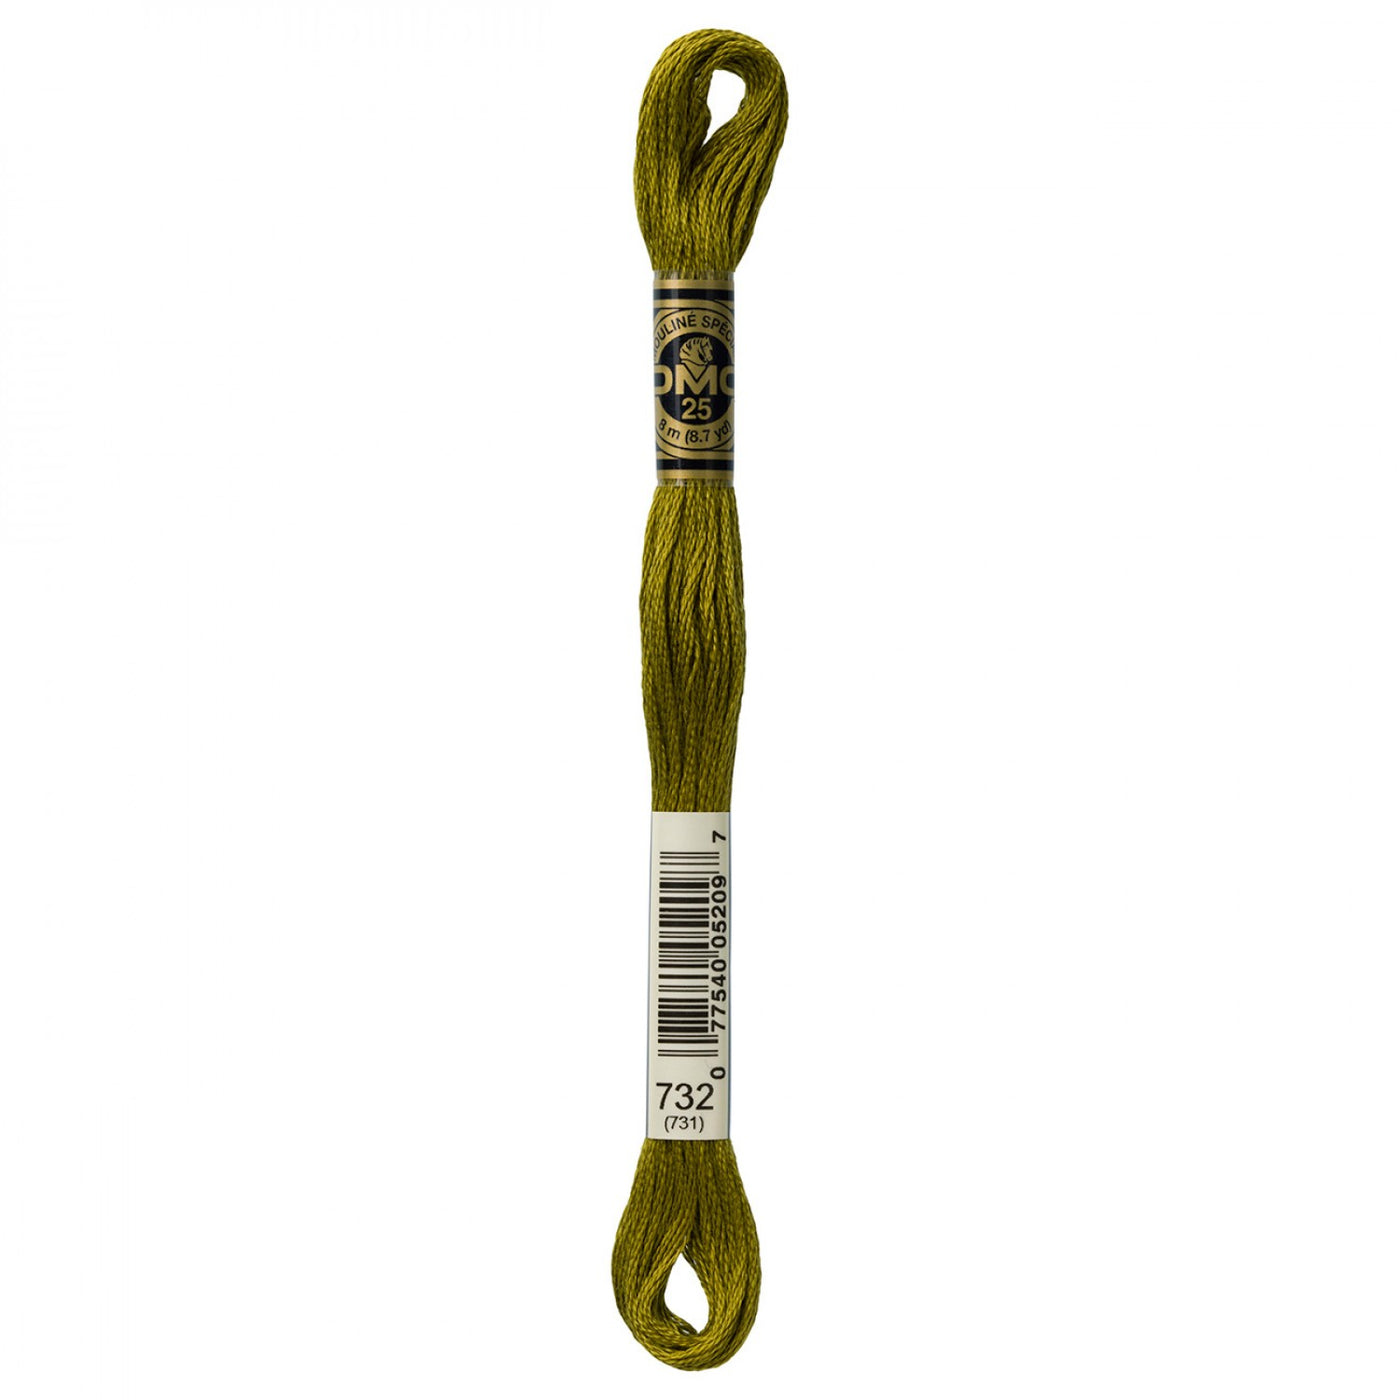 Strand Embroidery Floss 732 Olive Green (6732913475749)